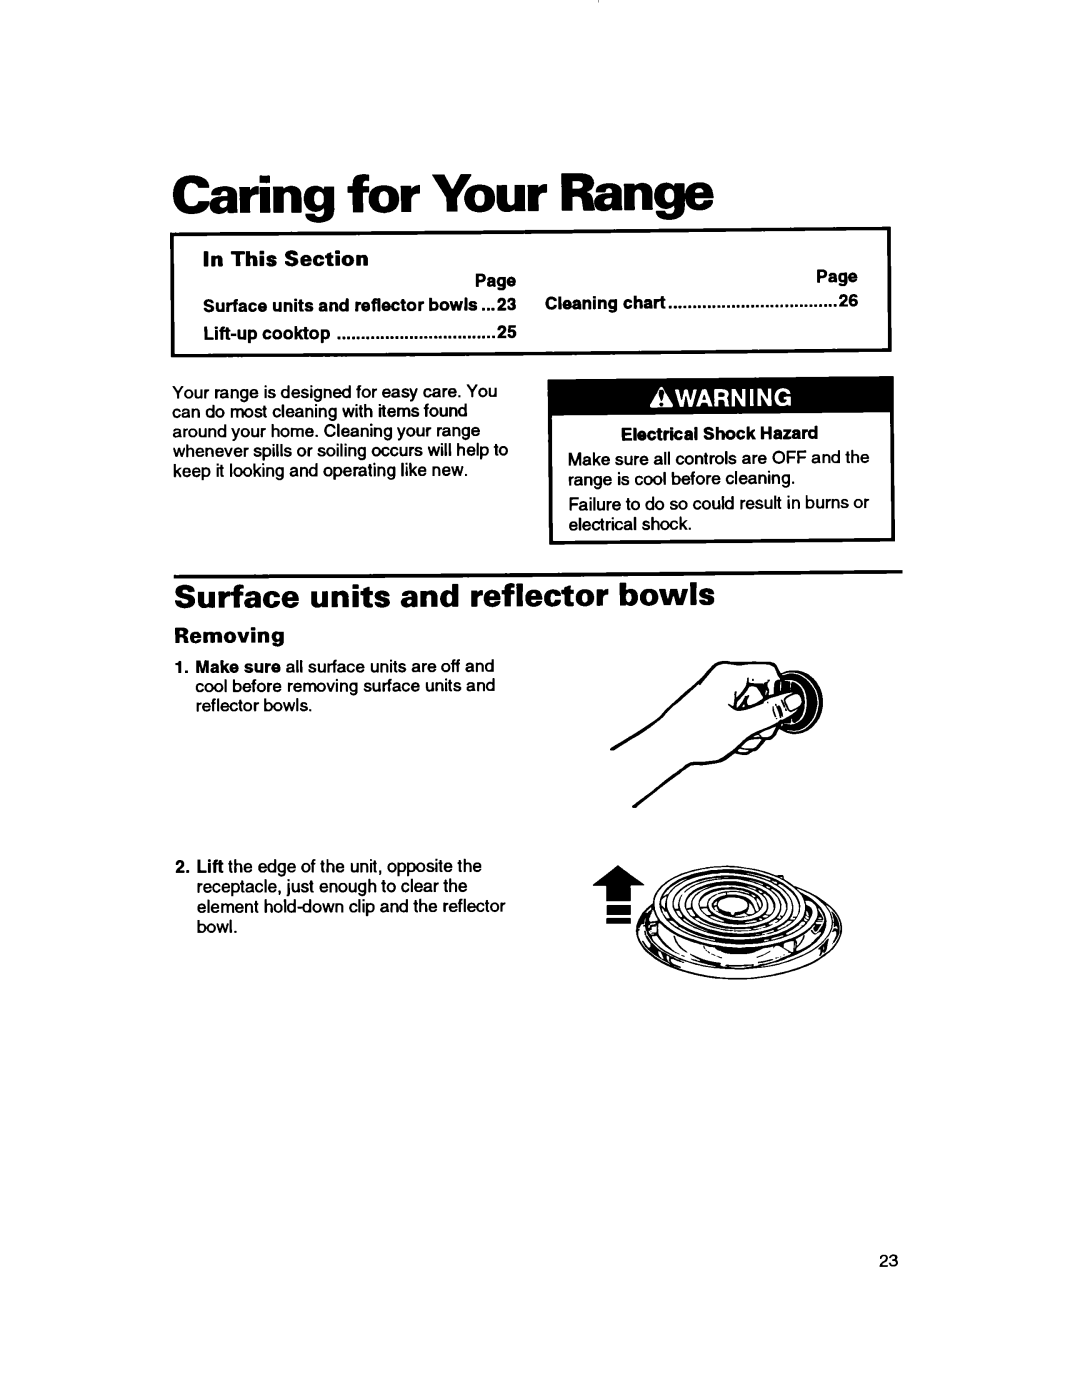 Whirlpool RF350BXB Caring for Your Range, Surface units and reflector bowls, In This Section, Removing, Lift-upcooktop 